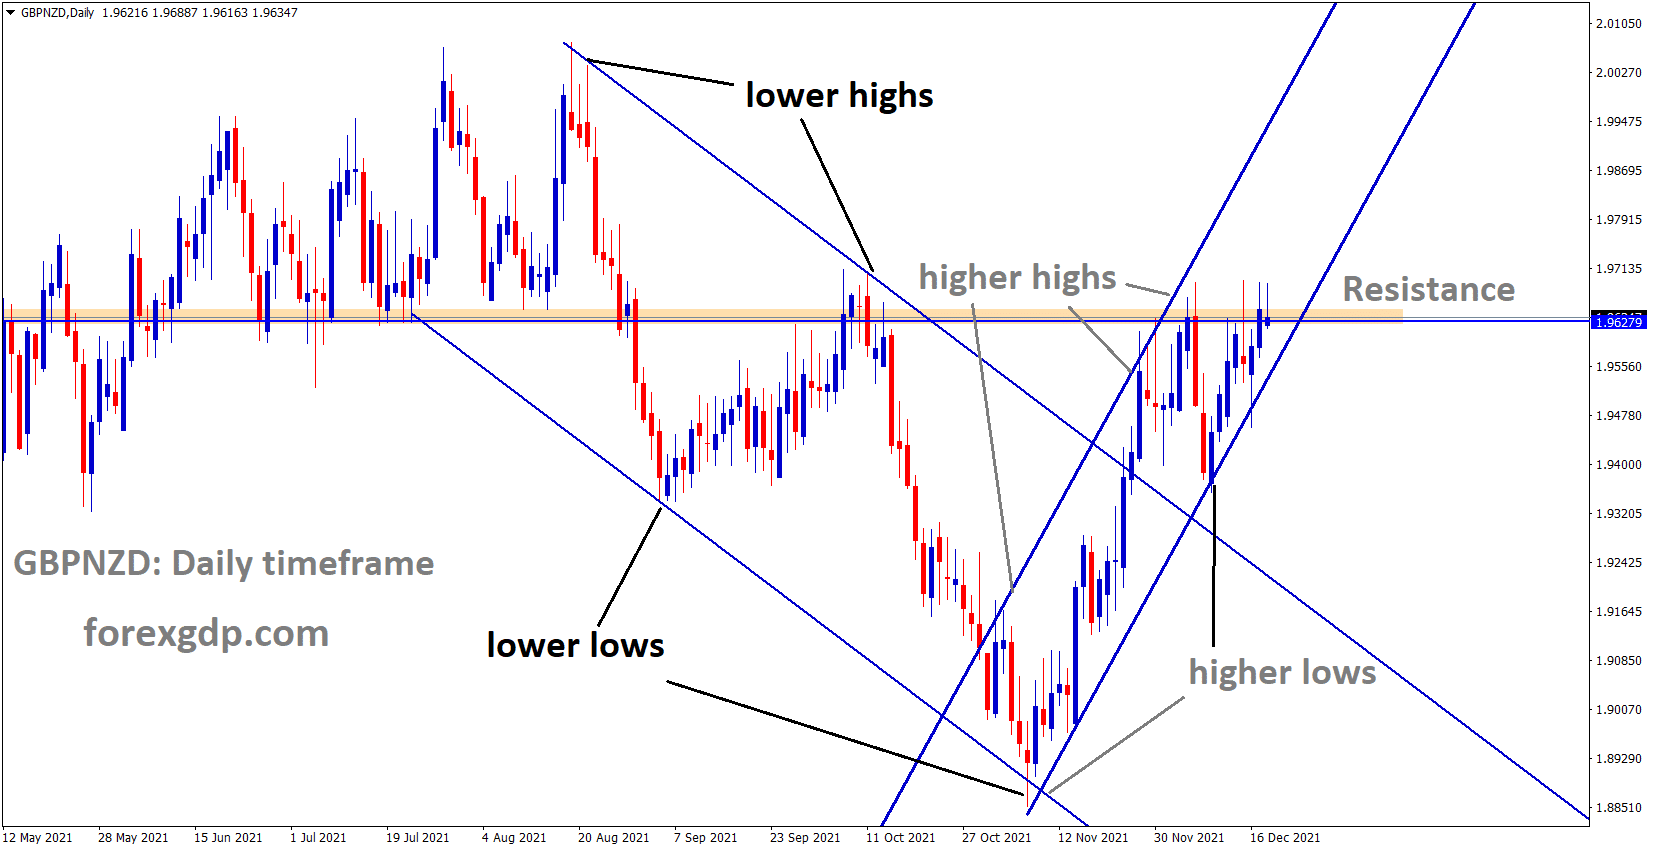 GBPNZD is moving in an Ascending channel and the market has reached the previous resistance area of the channel